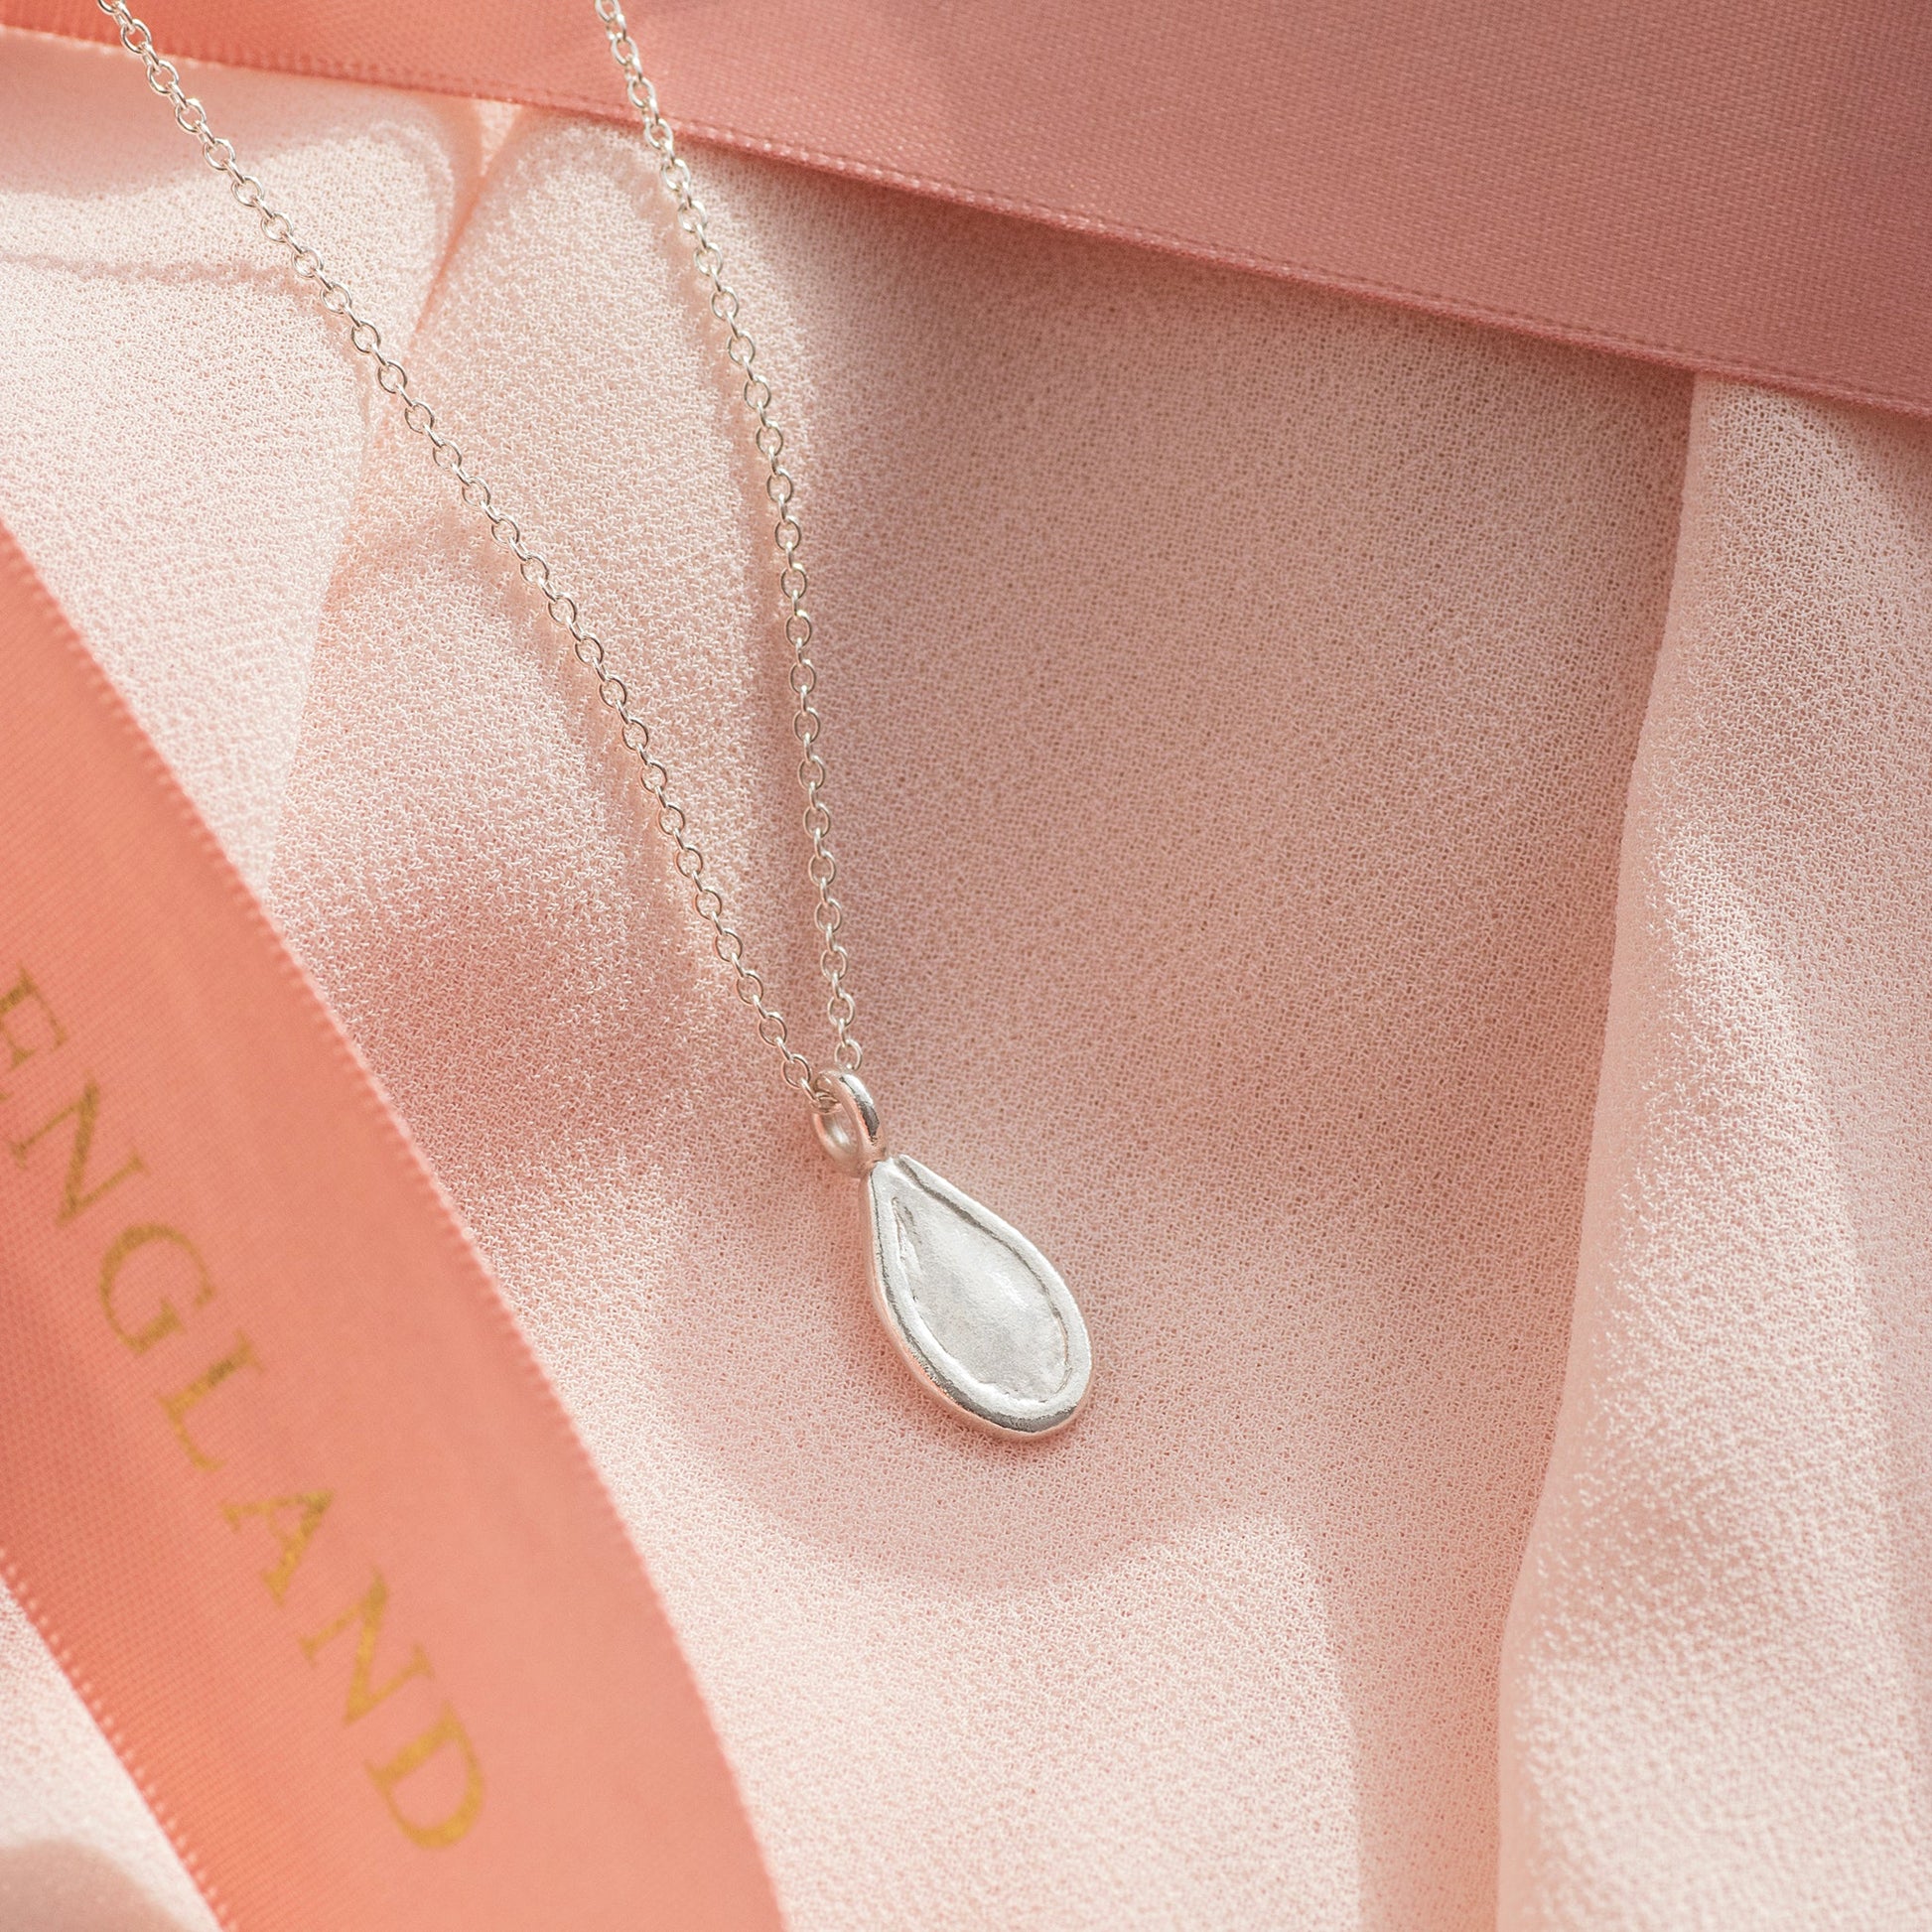 Graduation Gift - Silver Seed Necklace